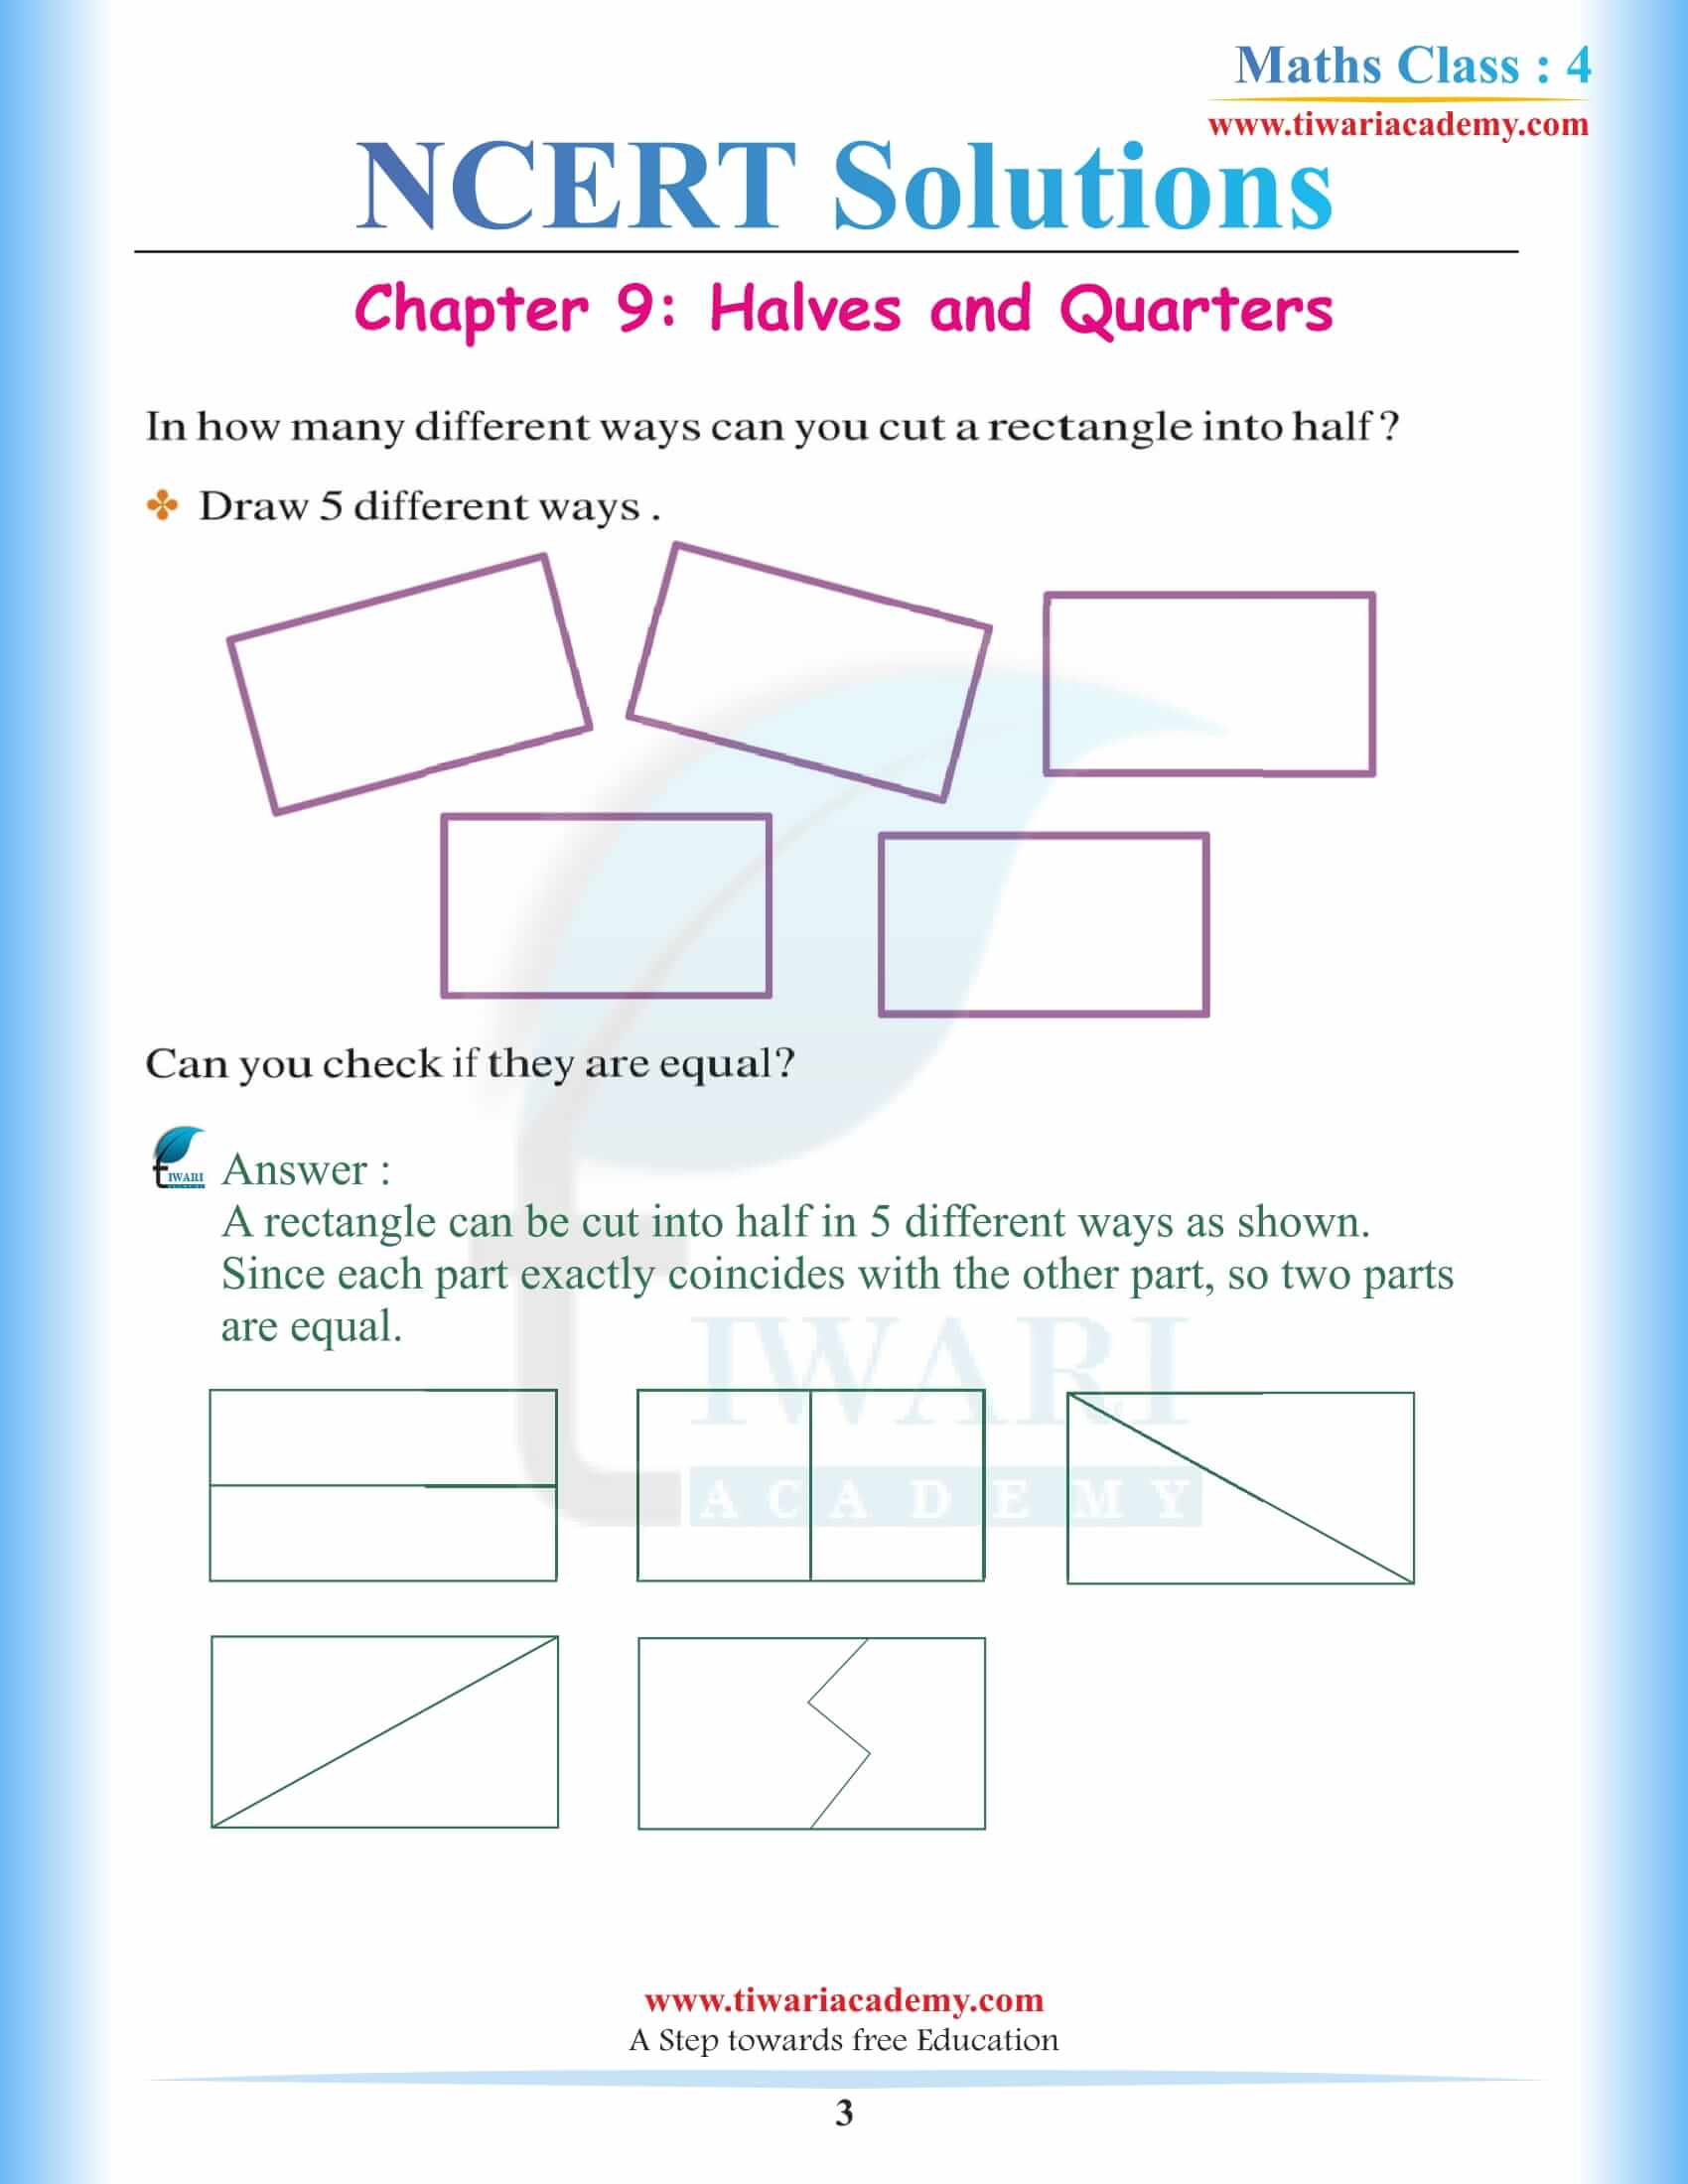 NCERT Solutions for Class 4 Maths Chapter 9 in English Medium